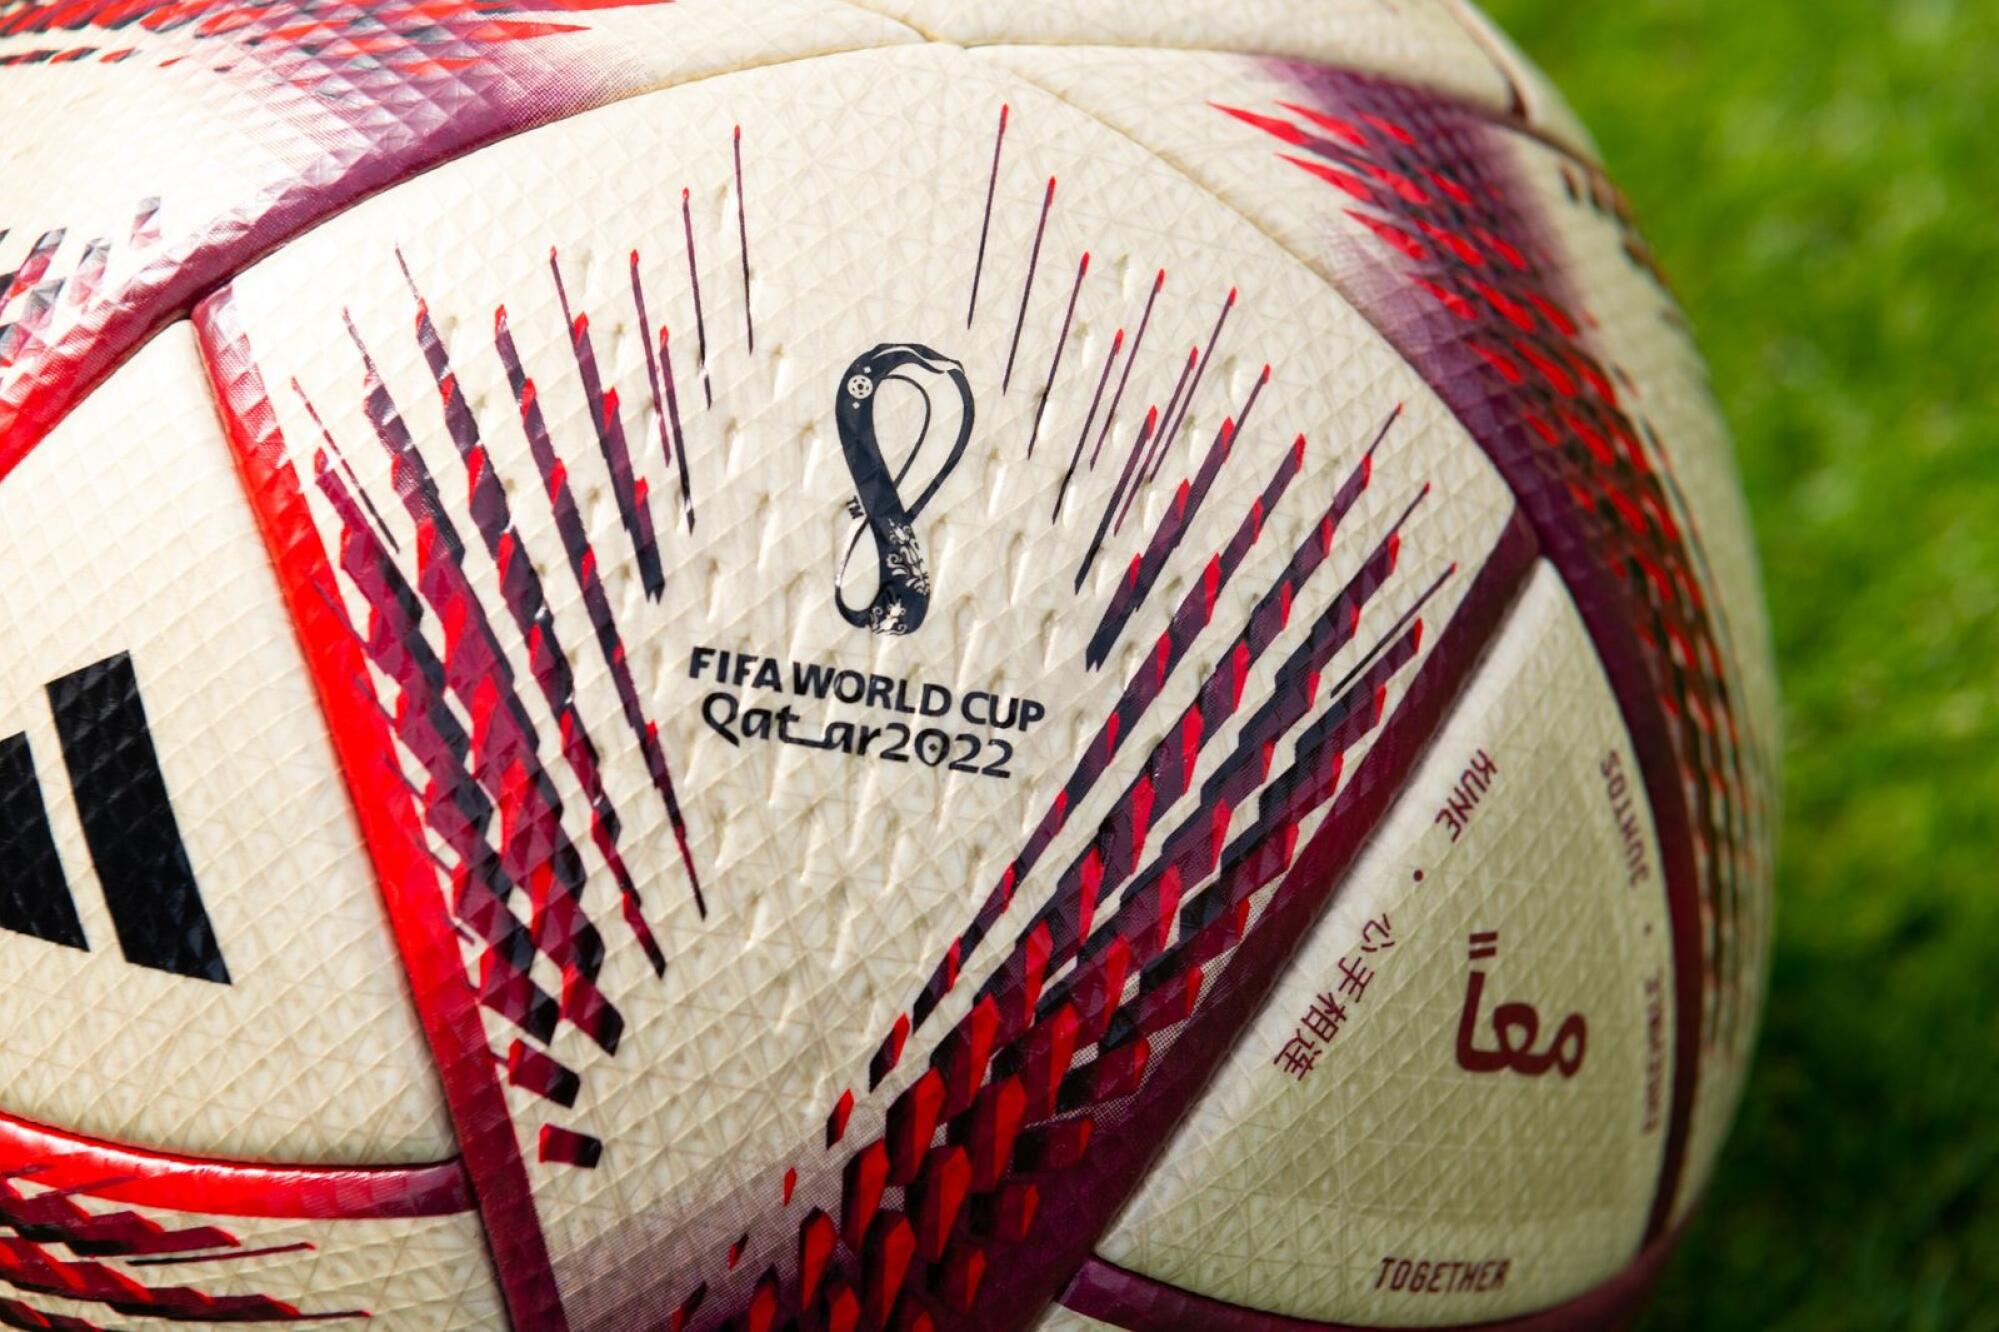 International sports apparel brand adidas have released a new ball for the final stages of the 2022 Fifa World Cup